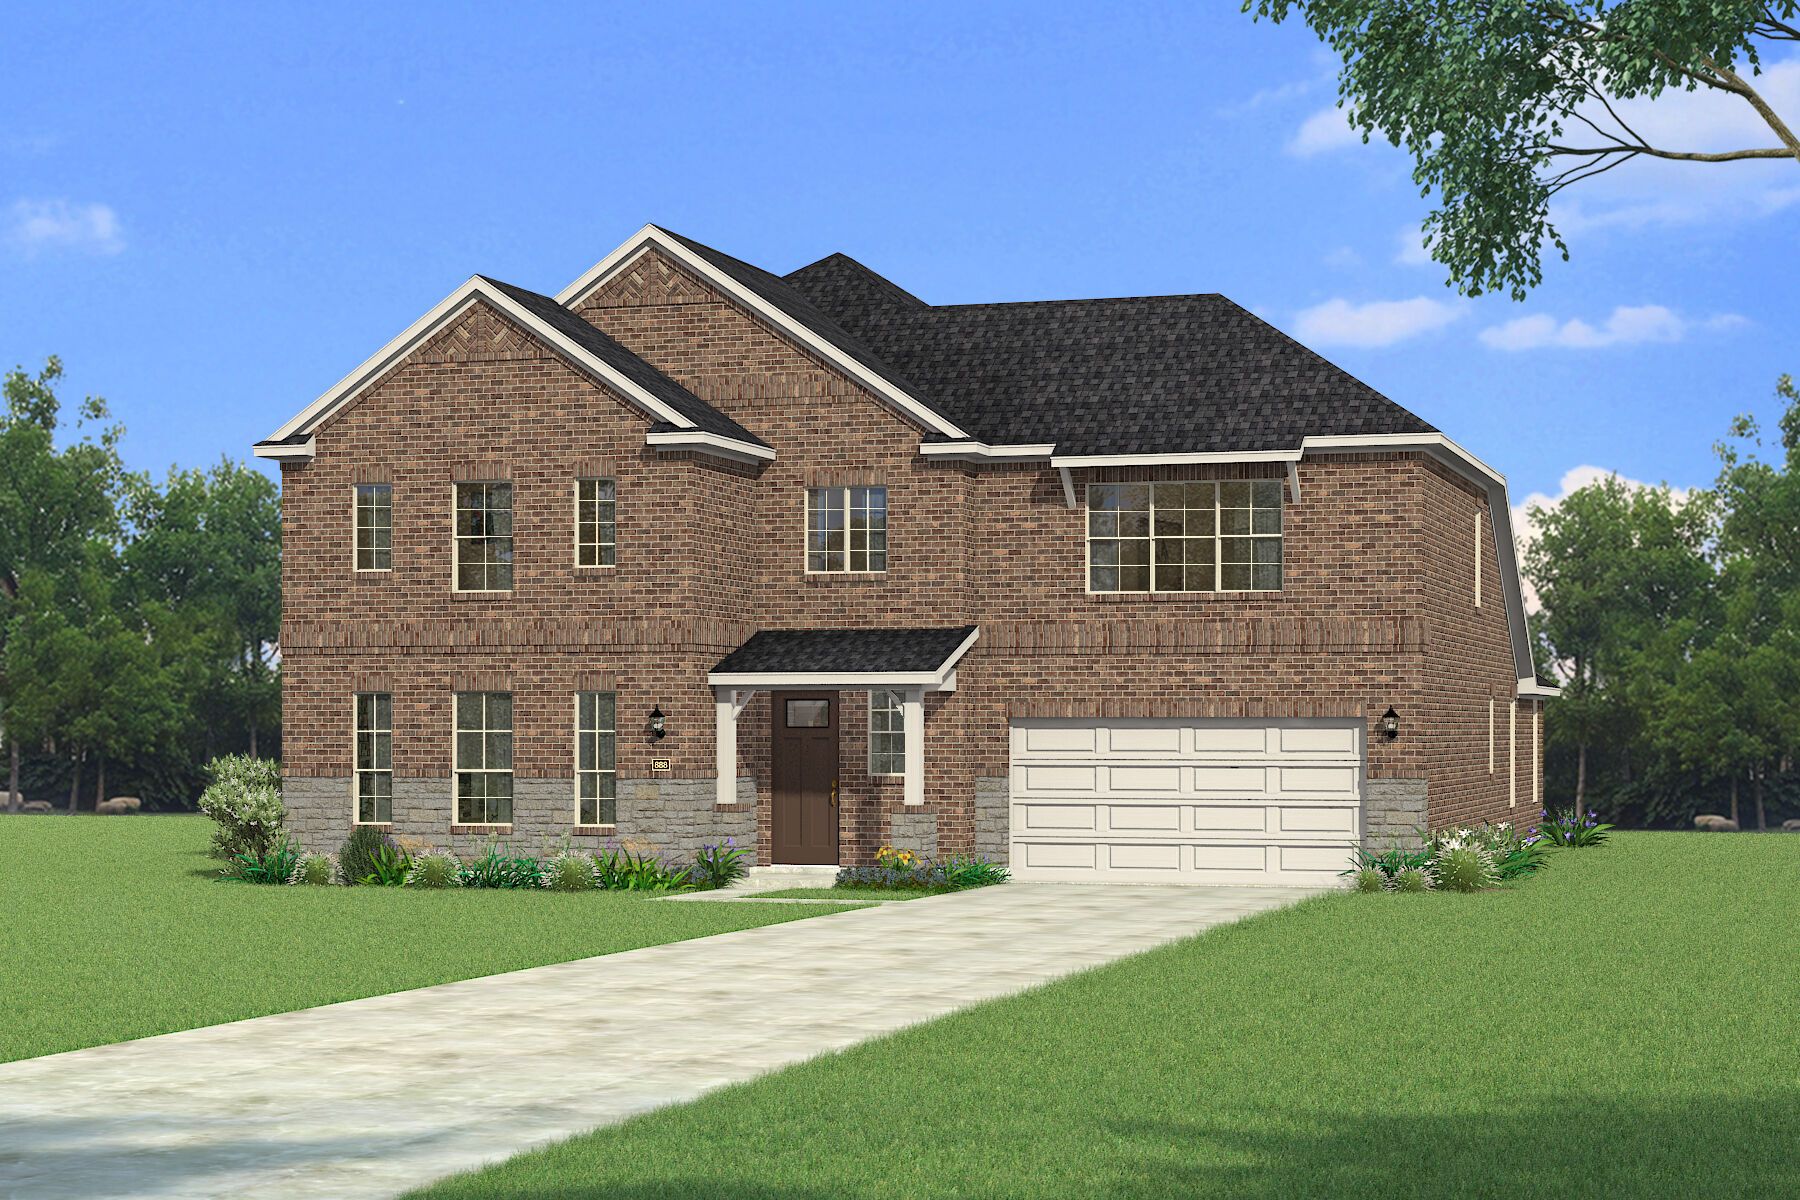 Exterior:The Siena - Hill Country 2 Elevation